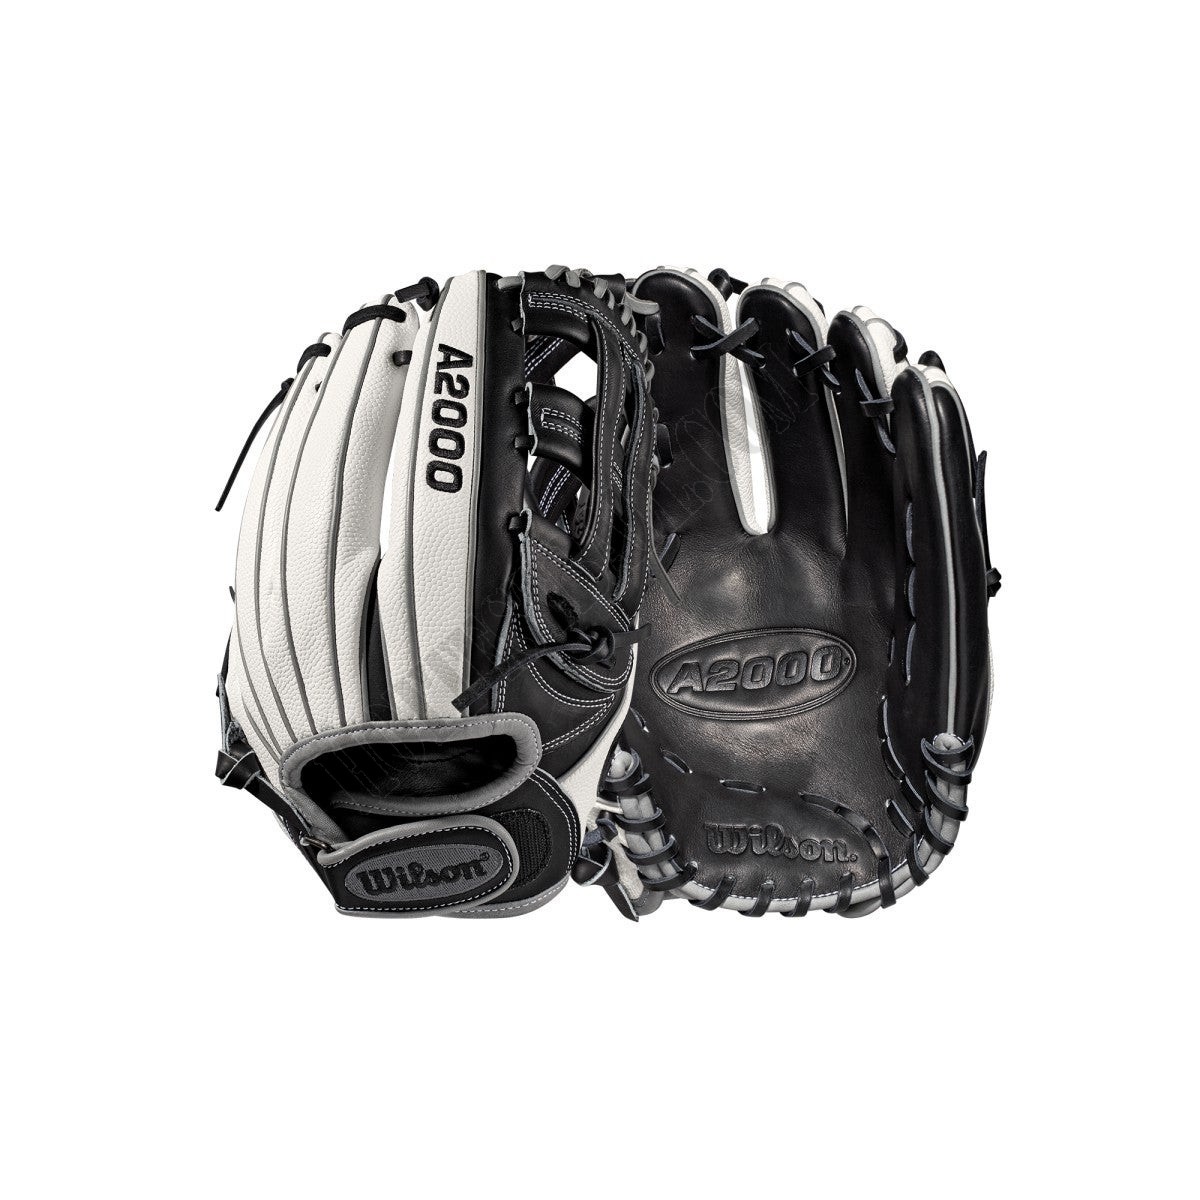 2019 A2000 FP12 SuperSkin 12" Infield Fastpitch Glove - Right Hand Throw ● Wilson Promotions - -0